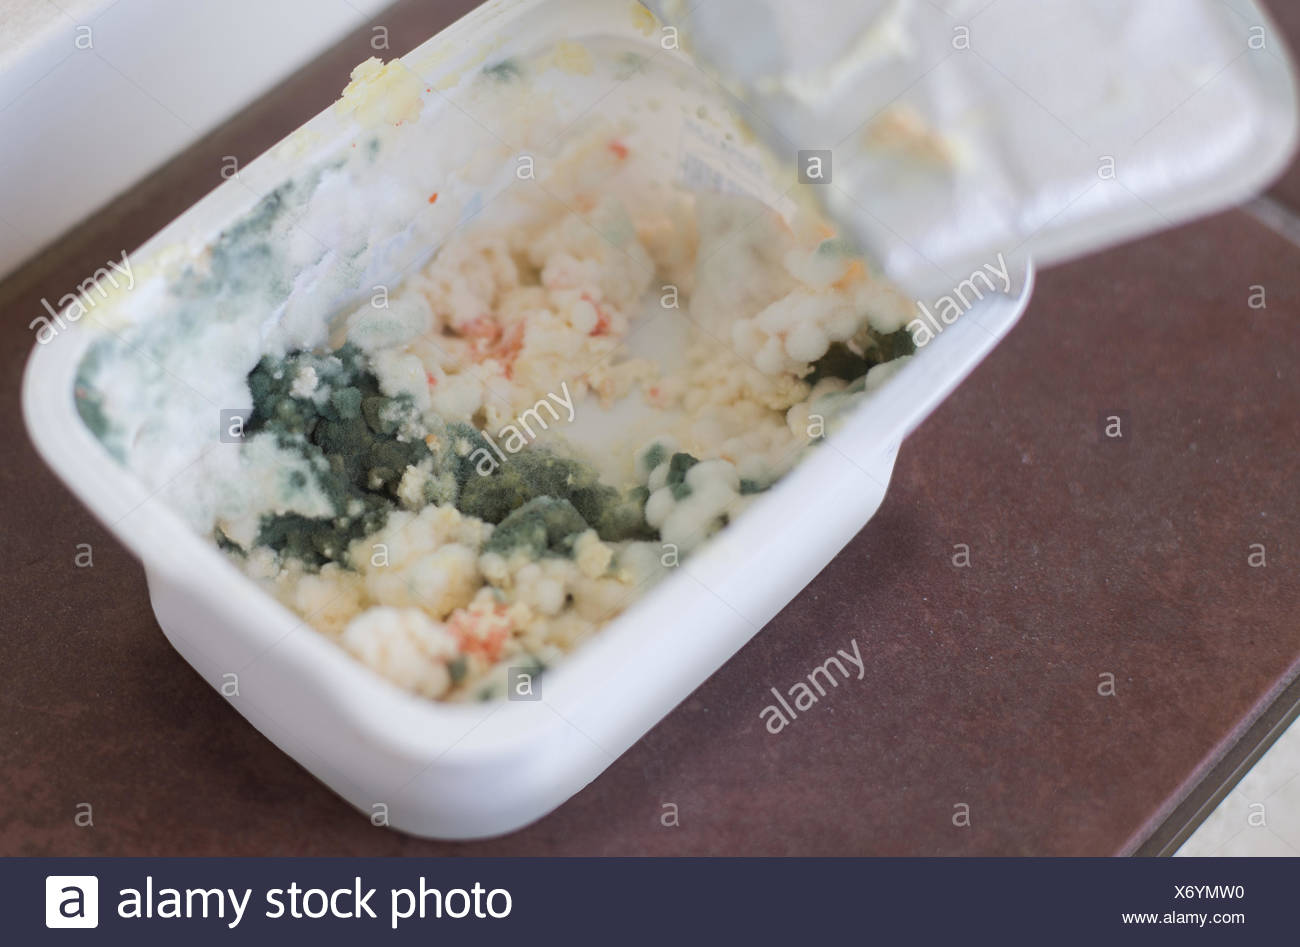 Close Up On Rotten Butter Or Cottage Cheese Stock Photo 279662908